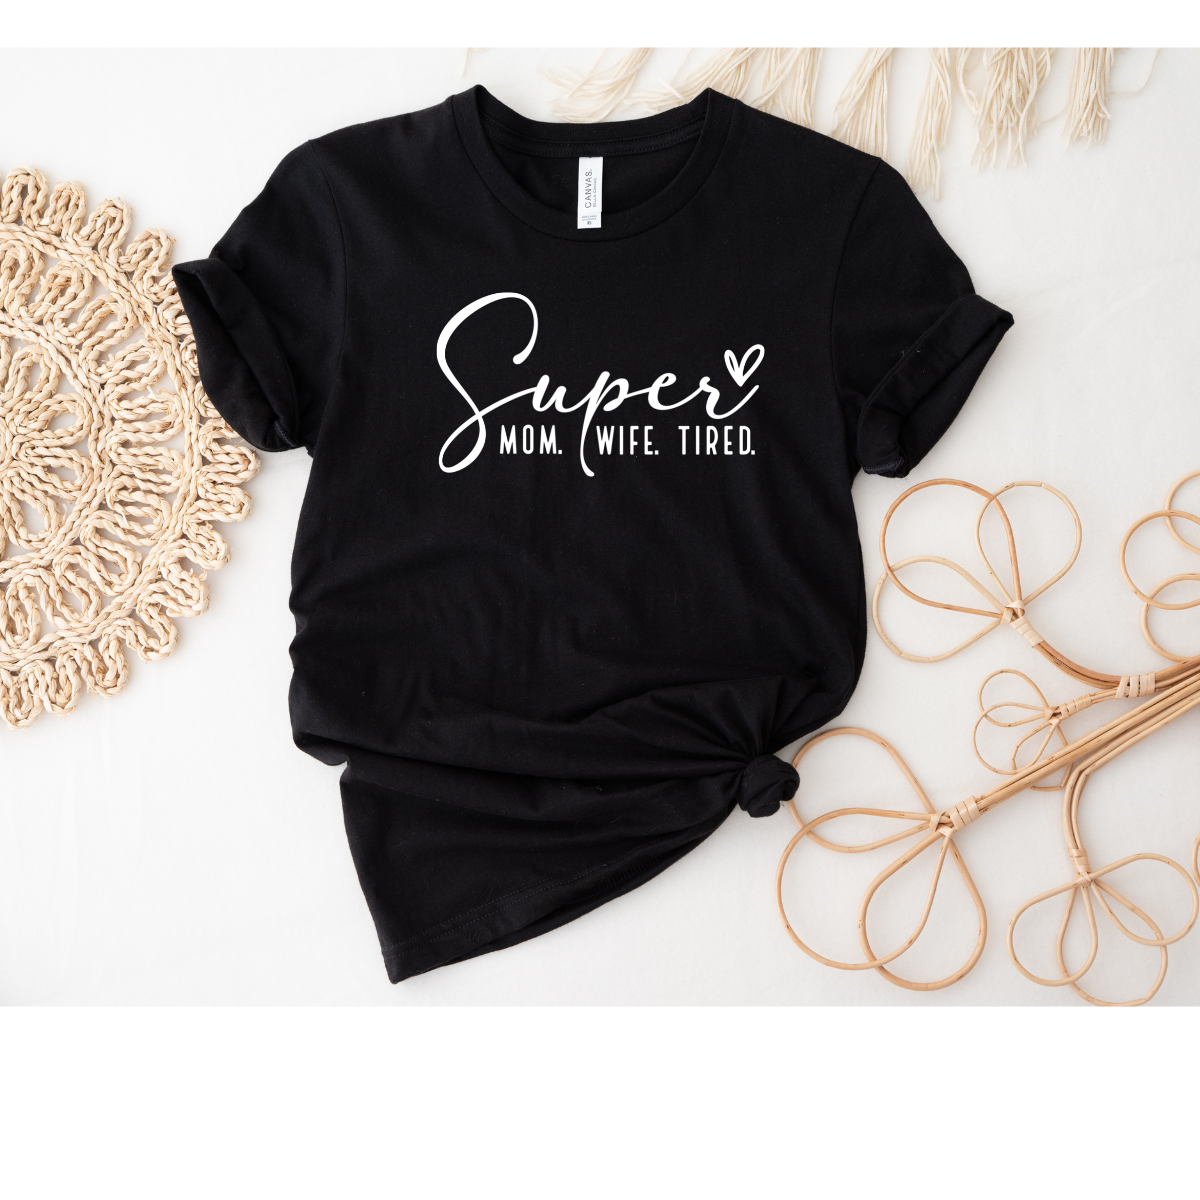 Super Mom. Wife. Tired T-Shirt